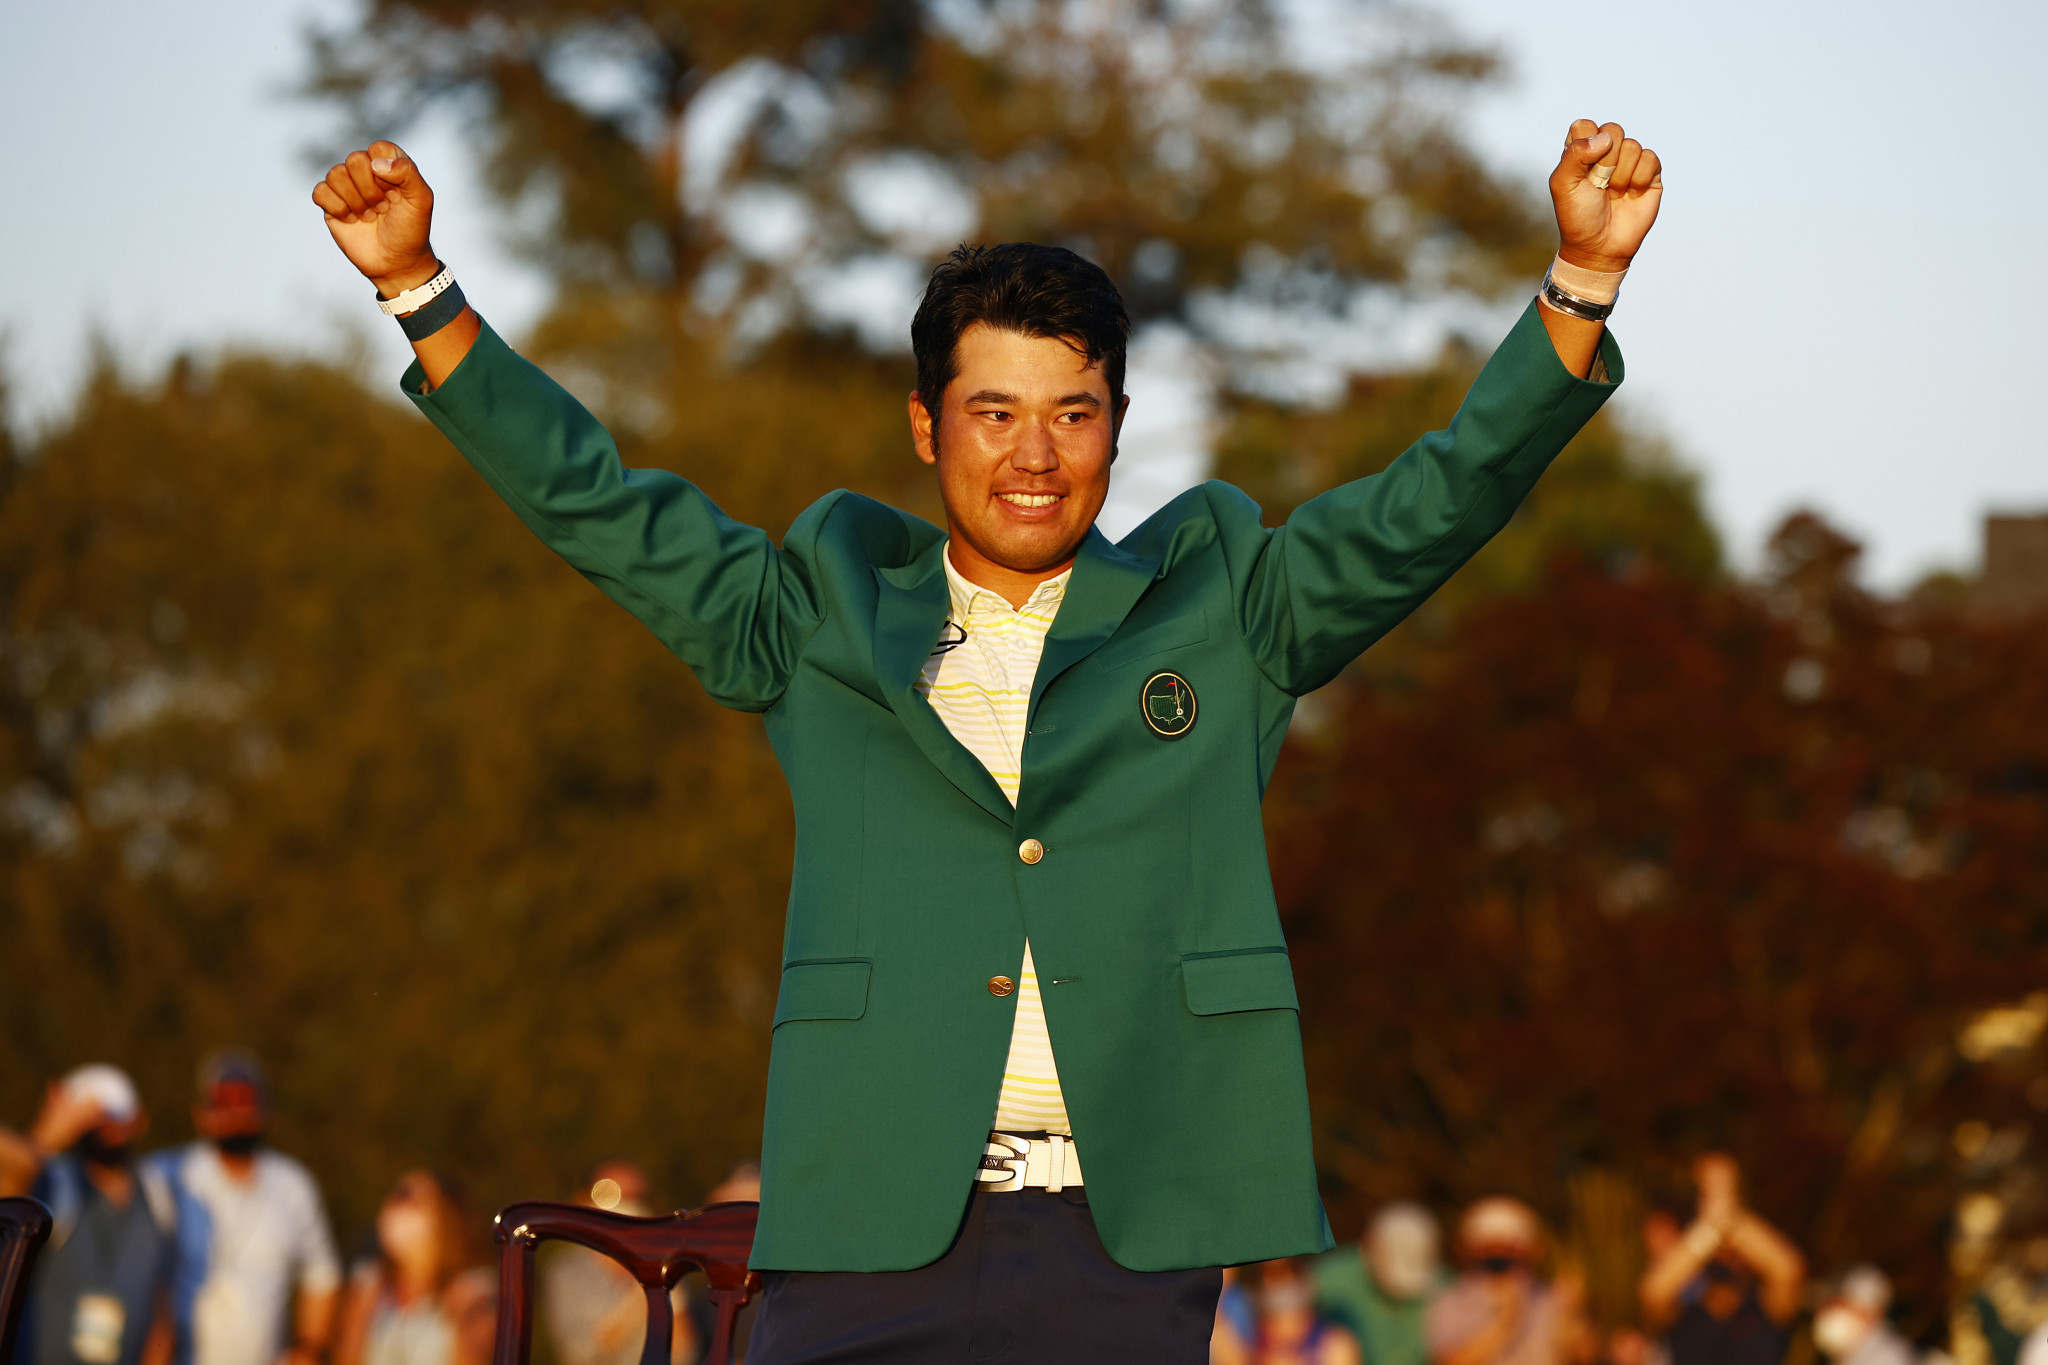 Hideki Matsuyama made history when he became the first Japanese man to claim a major title by winning the Masters crown in April ©Getty Images